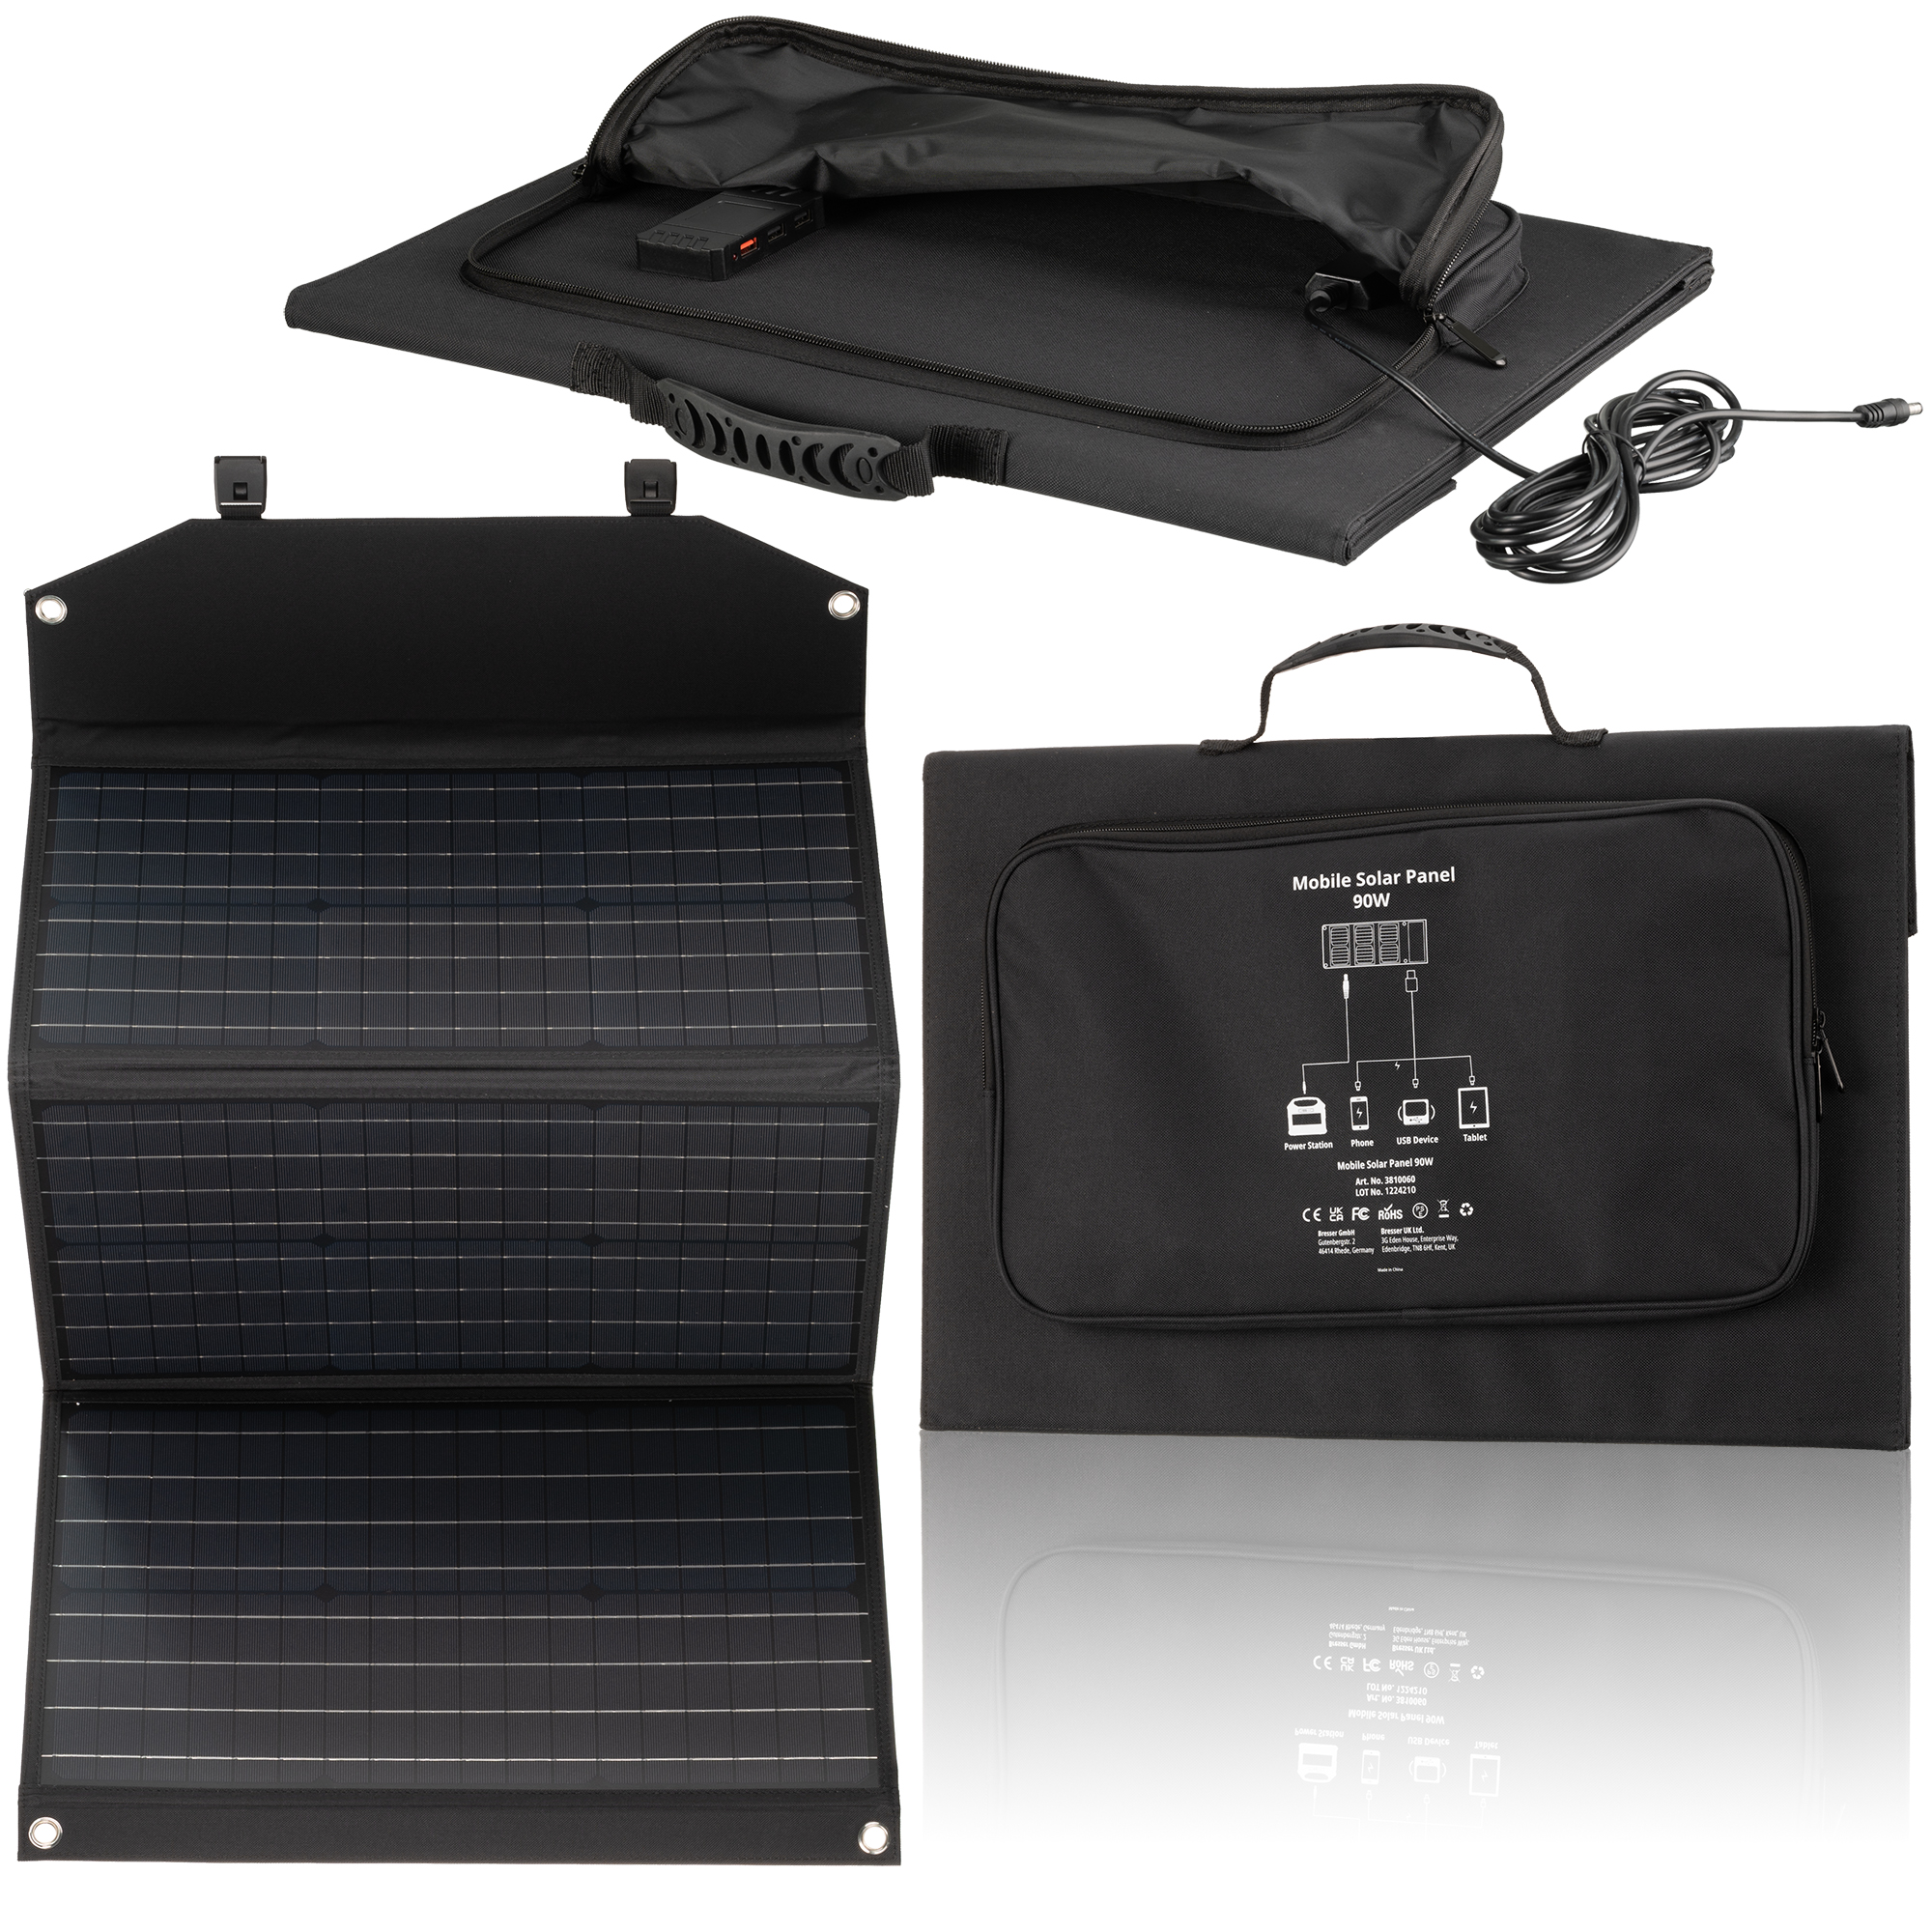 BRESSER Mobile Solar Charger 90 Watt with USB and DC output